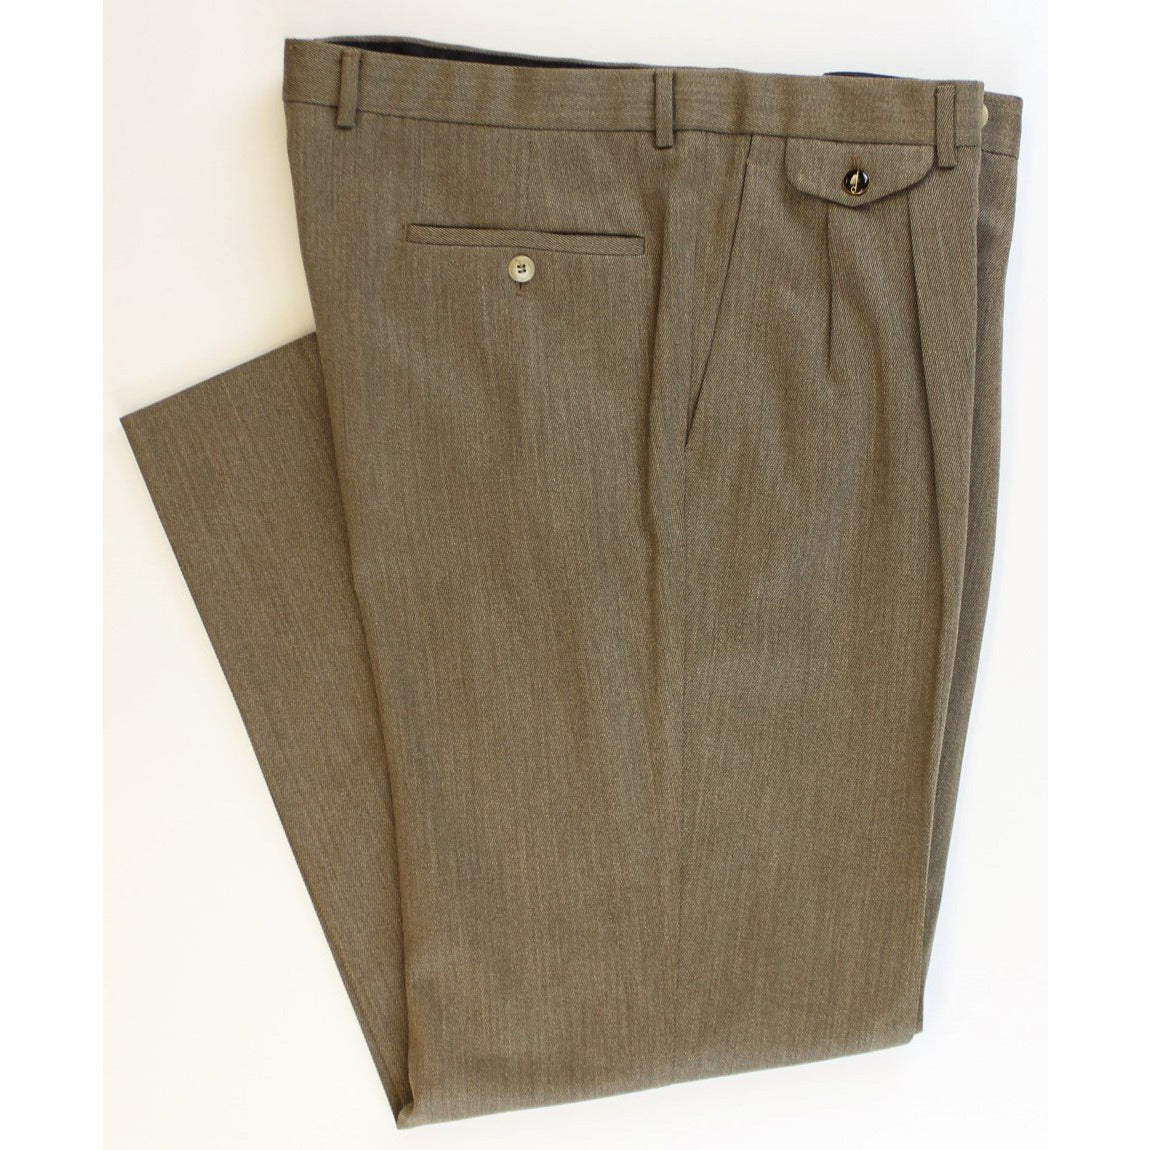 Alfred Dunhill Calvalry Twill Trousers